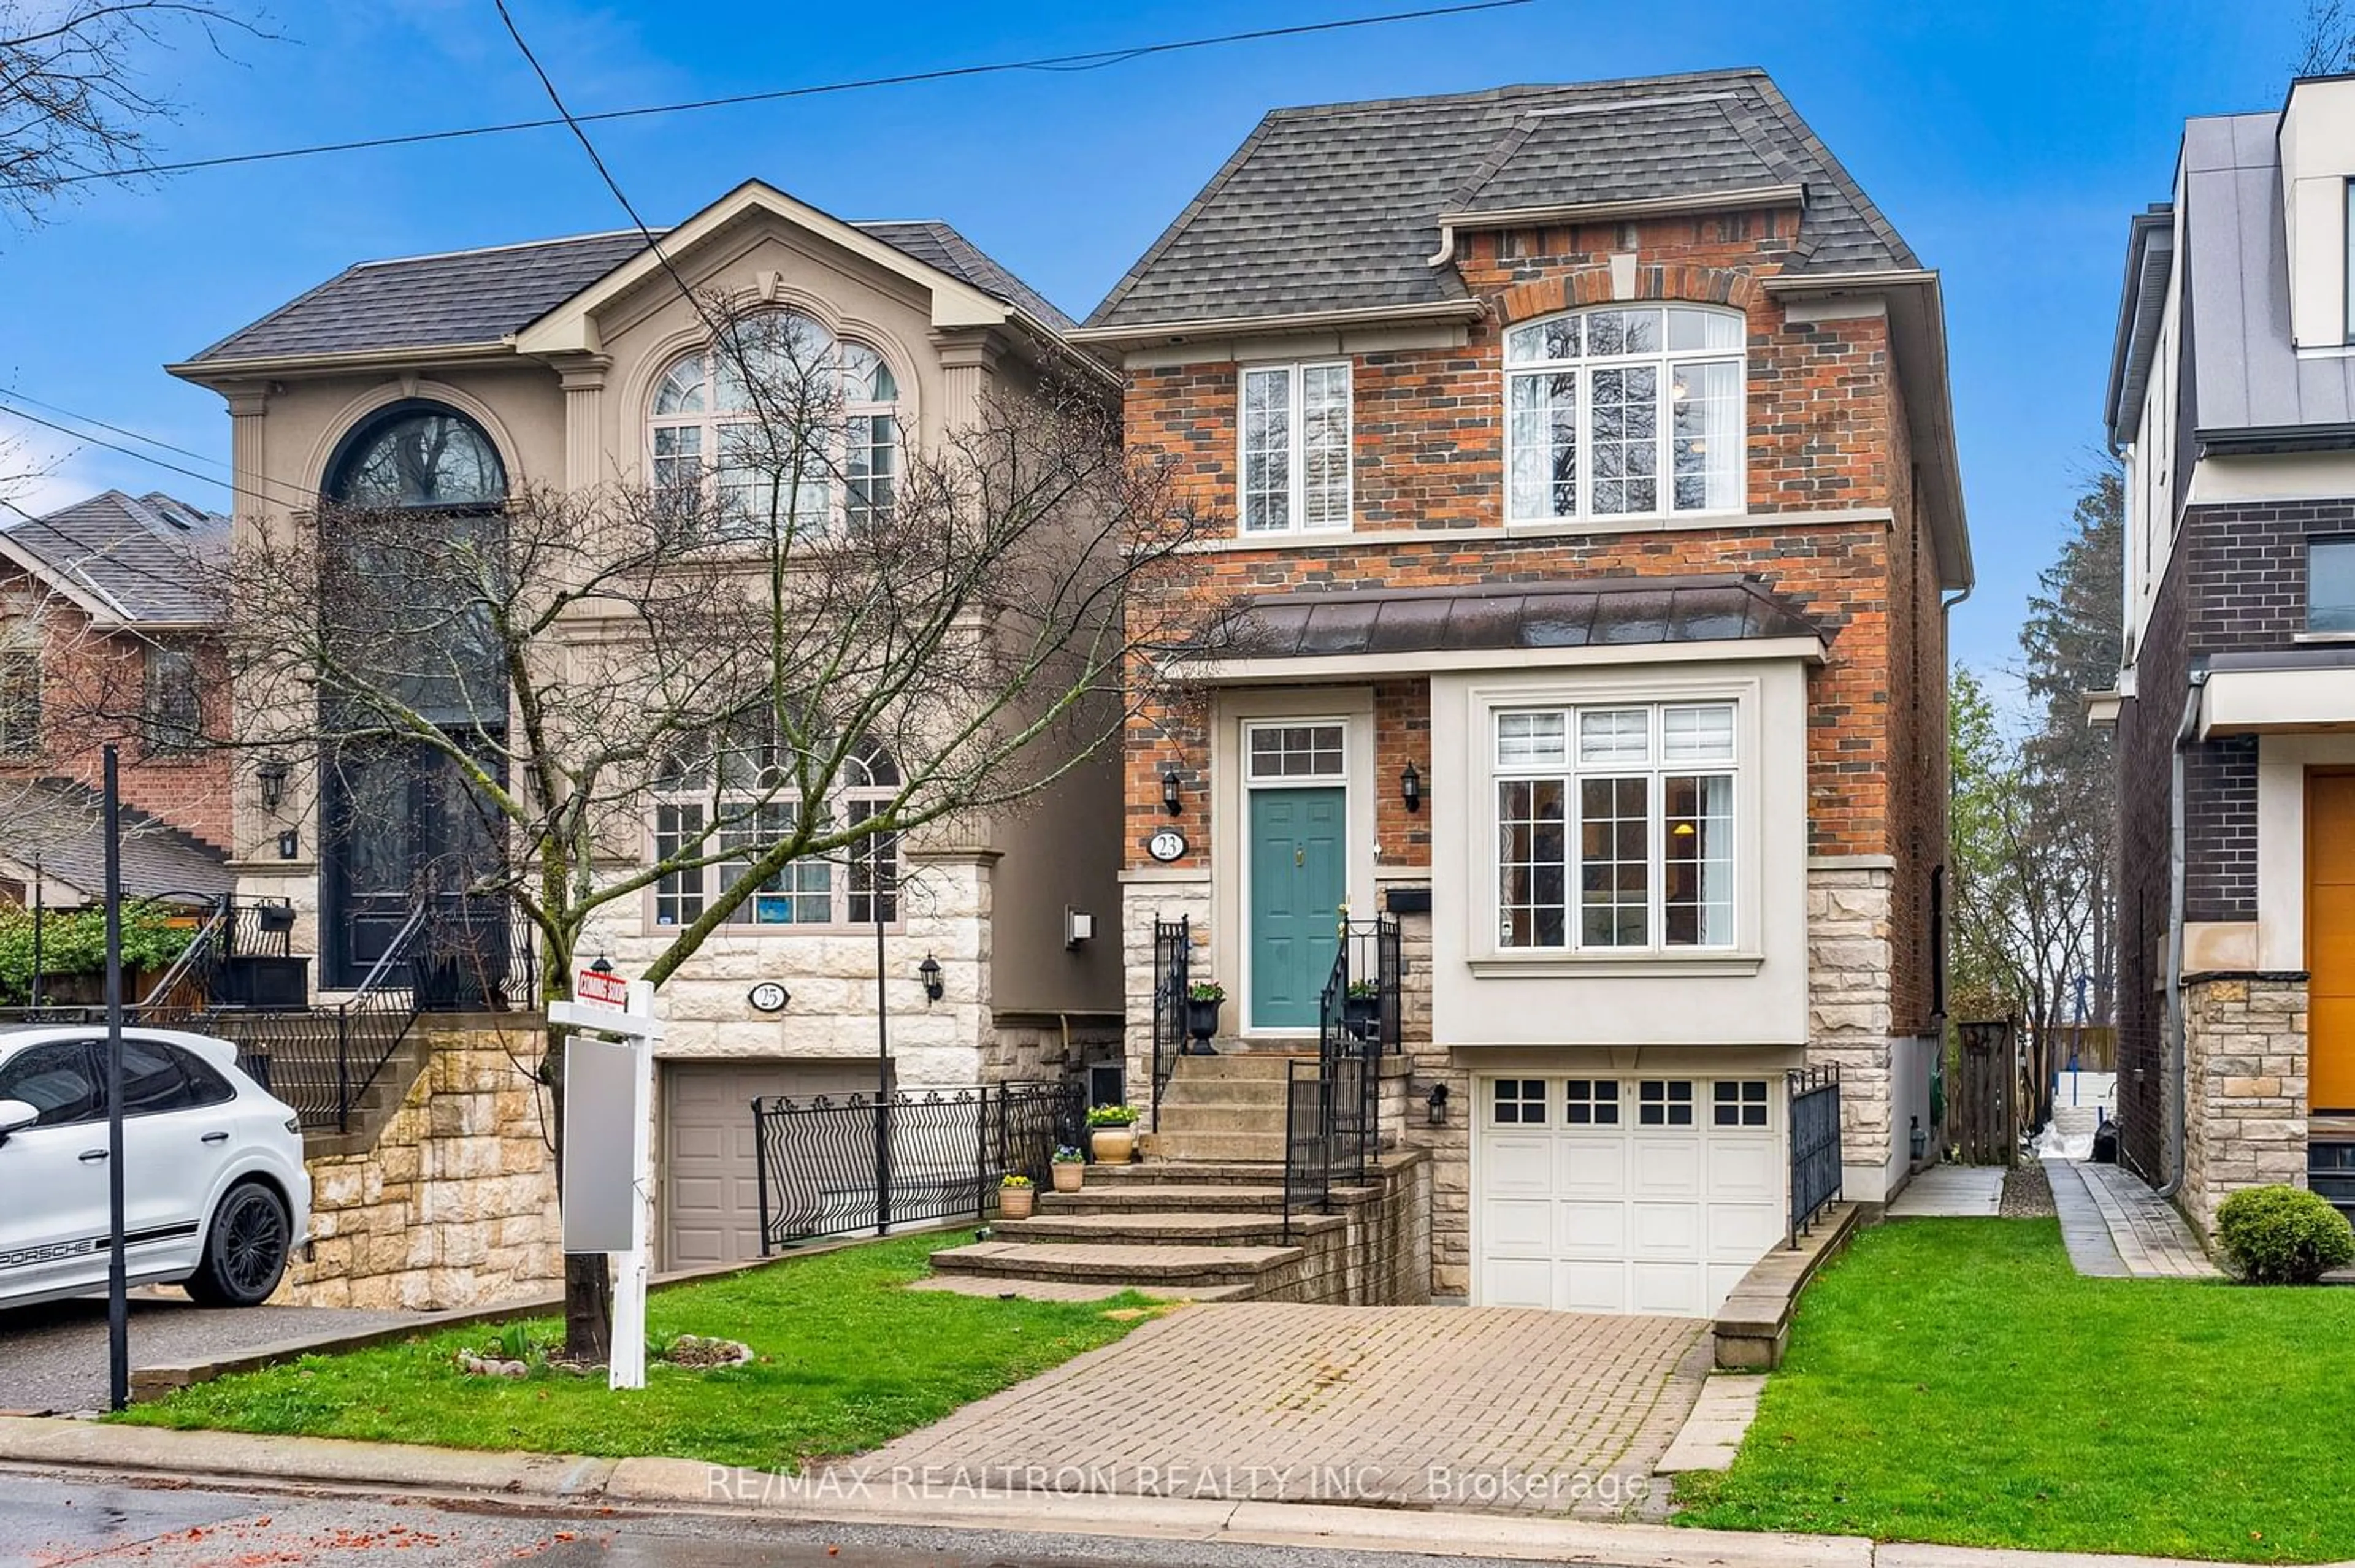 Home with brick exterior material for 23 Stuart Cres, Toronto Ontario M2N 1A6